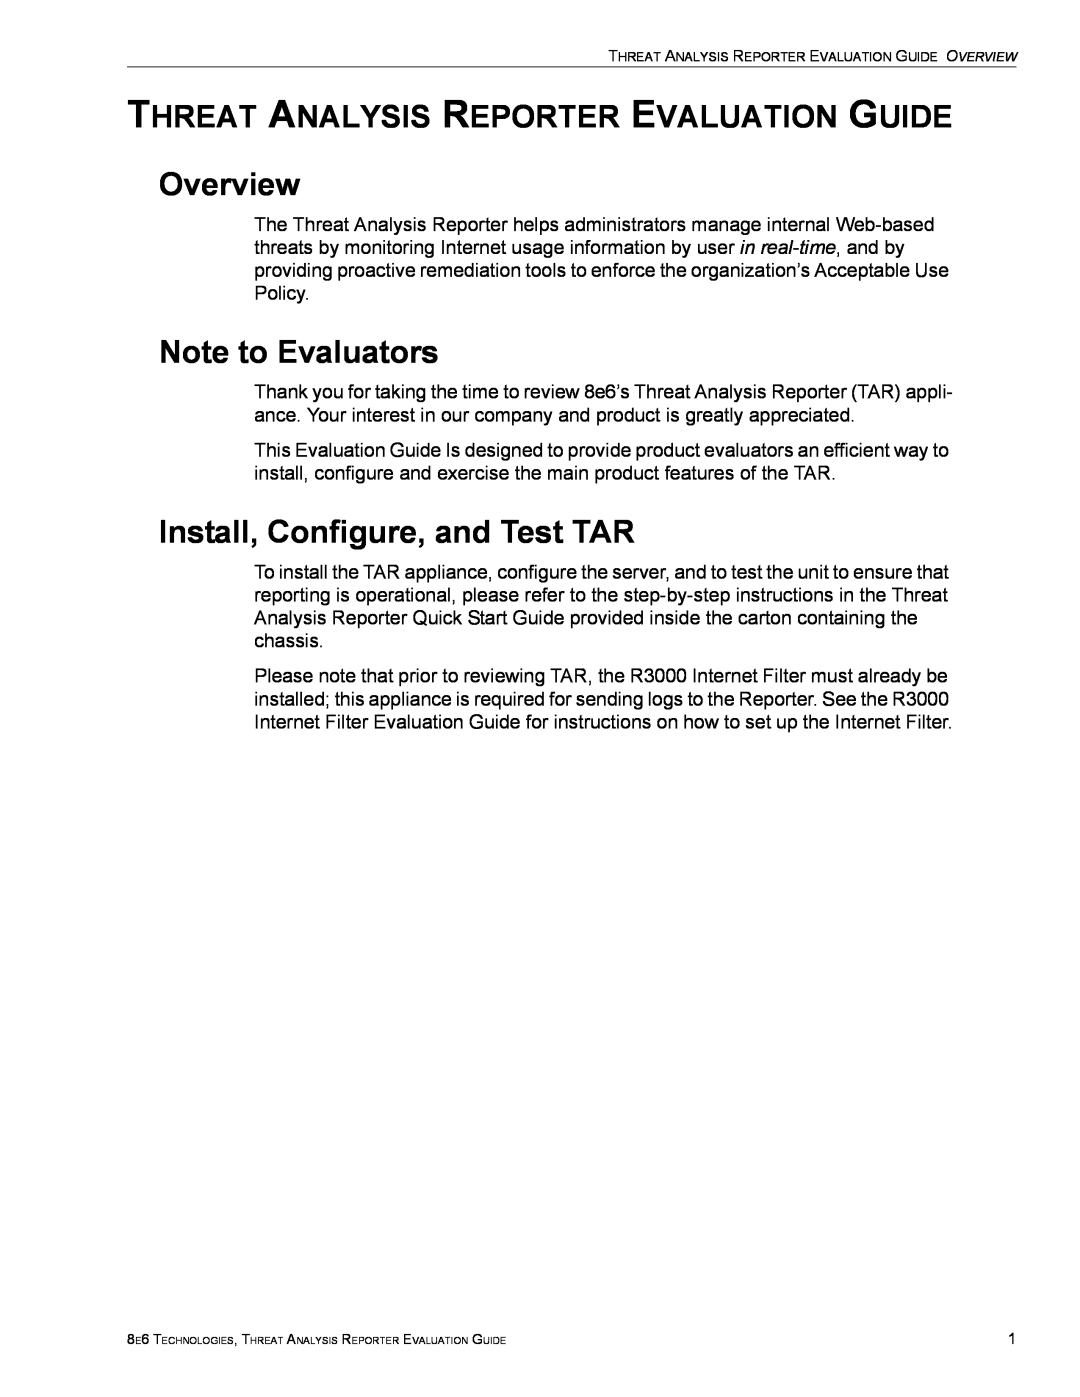 8e6 Technologies TAR HL/SL/MSA manual Overview, Note to Evaluators, Install, Configure, and Test TAR 